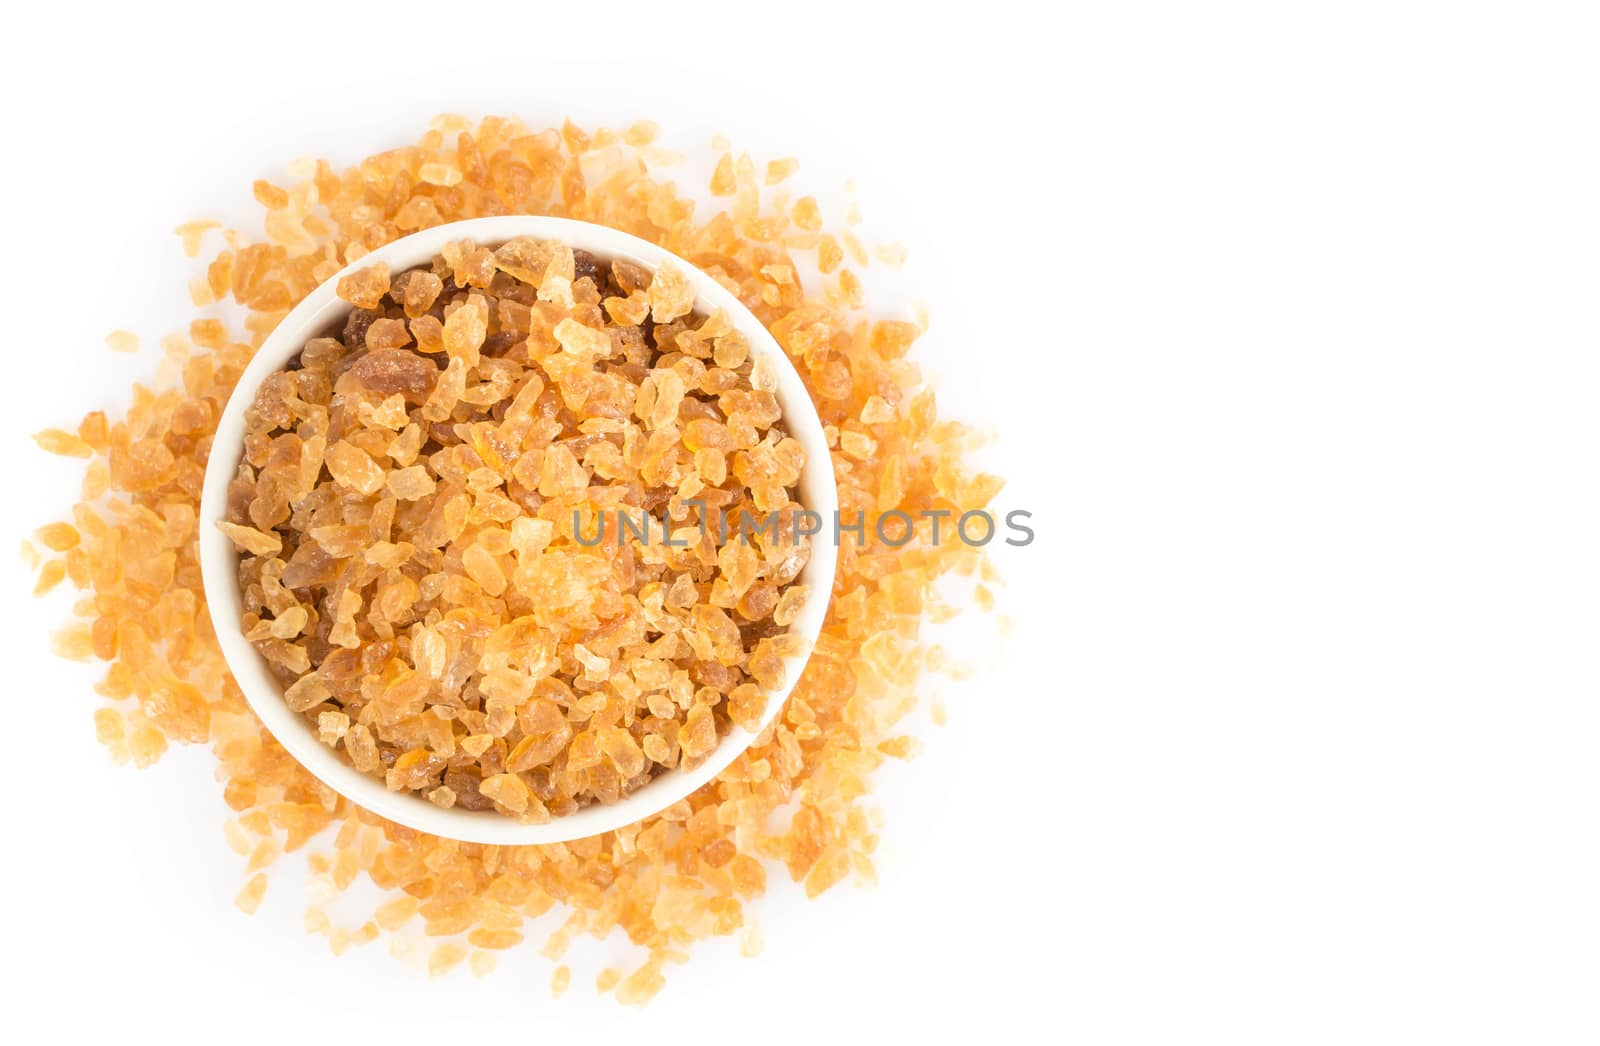 Brown sugar on ceramic bowl isolated with white background, top view ceramic bowl on white background